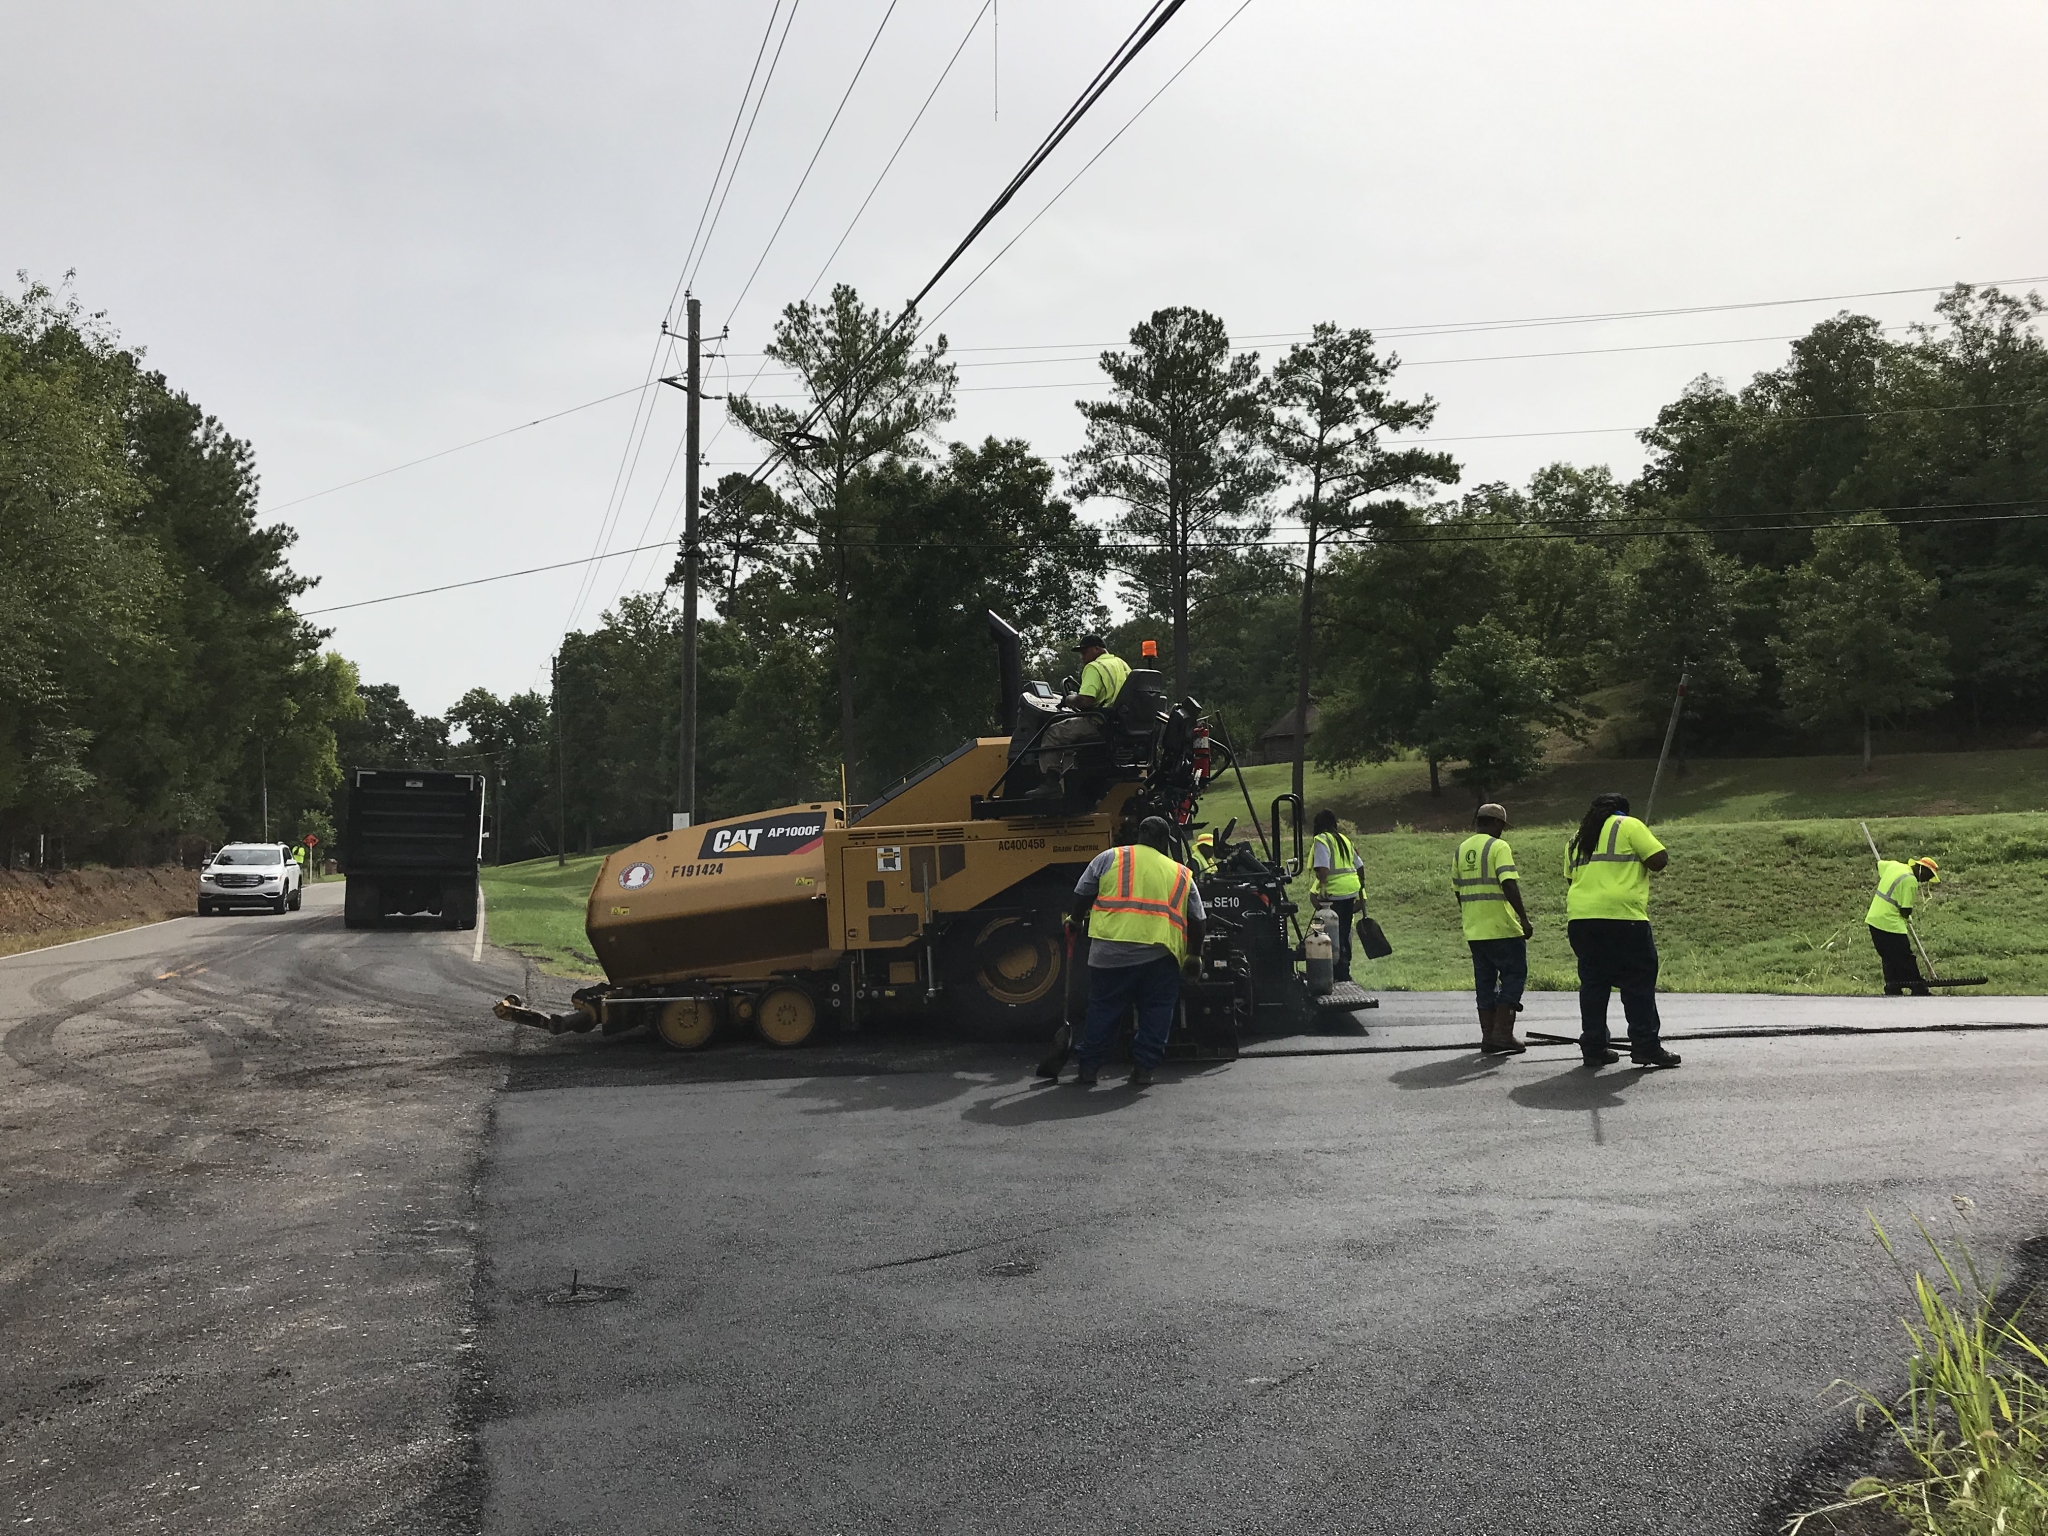 IMG 0491 1 Here's why $58 million is budgeted for road repairs next year in Jefferson County